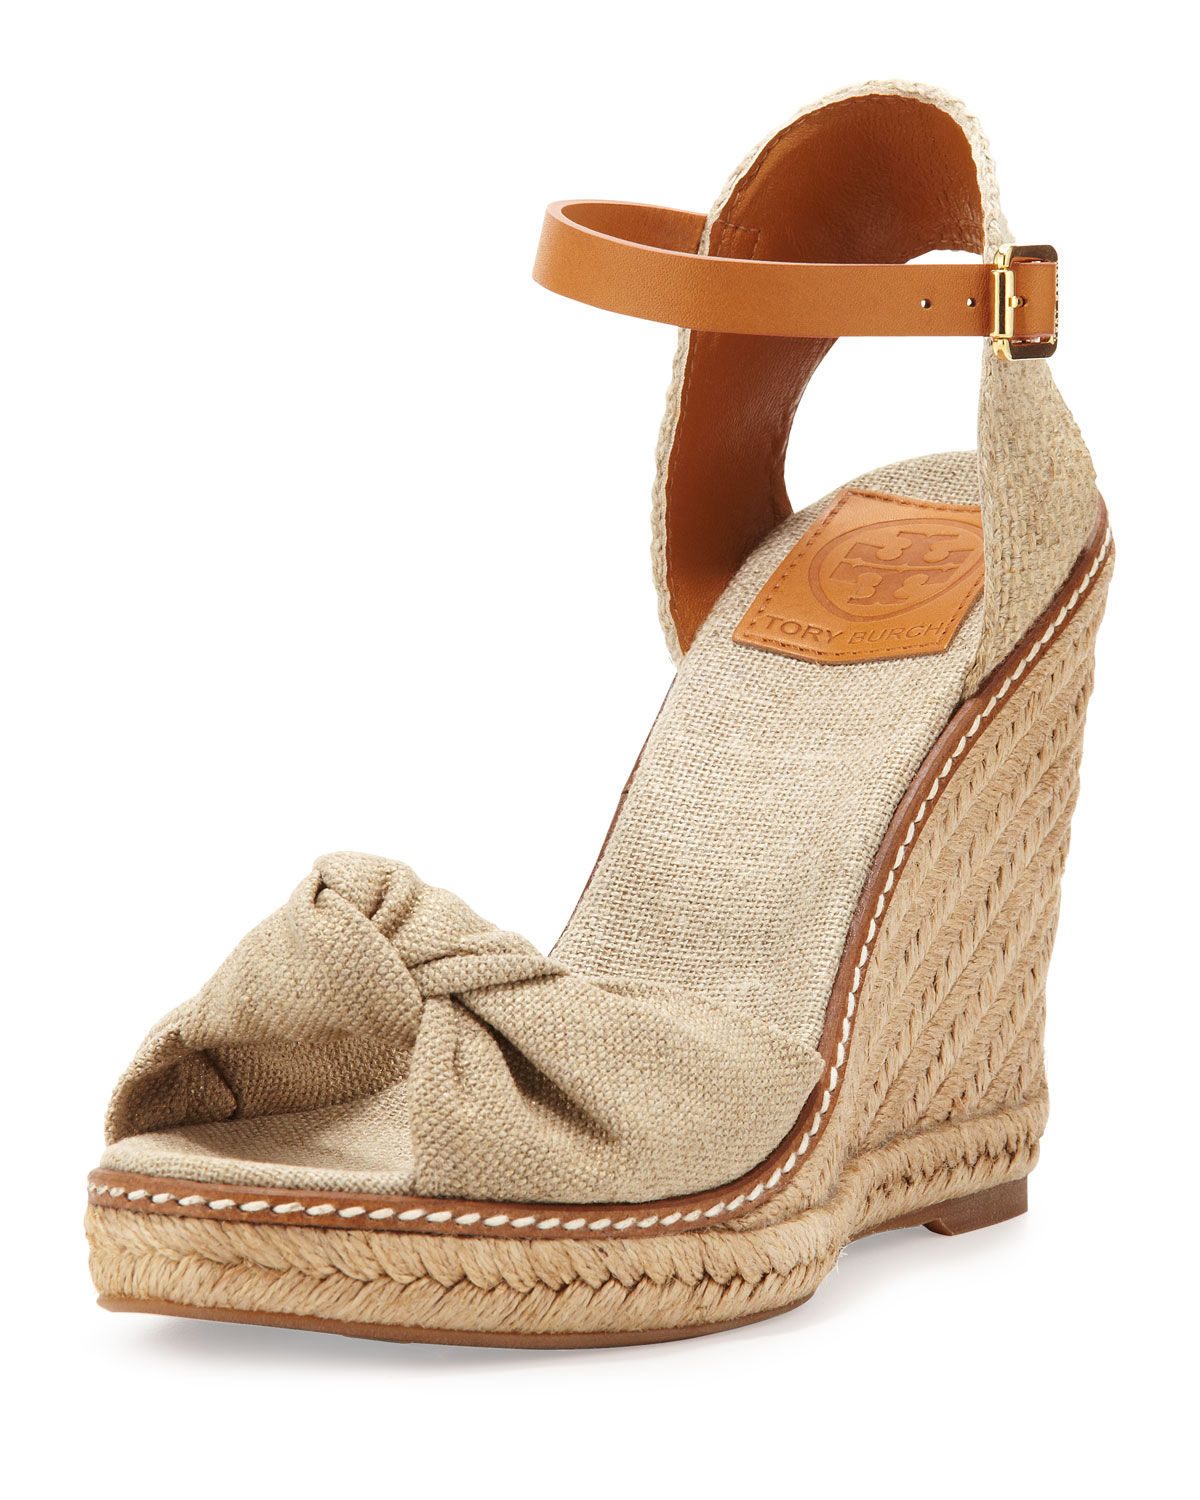 Lyst - Tory burch Macy Linen Espadrille Wedge Gold Wash in Natural